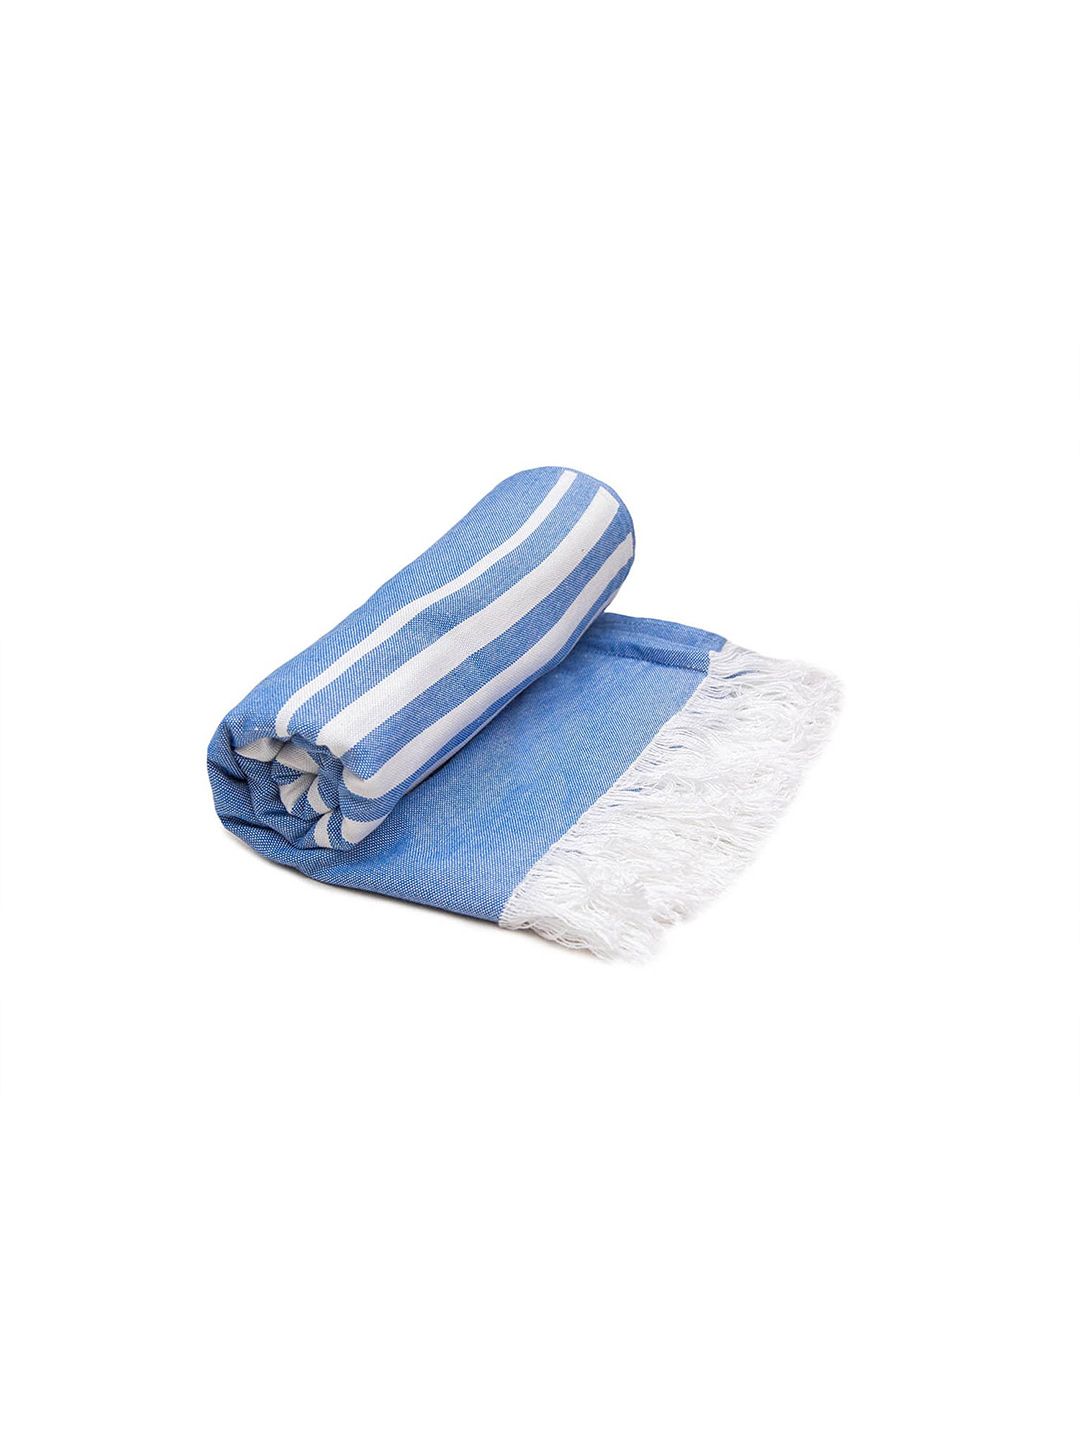 MUSH Blue & White Striped Bamboo 300 GSM Quick Dry Turkish Bath Towel Price in India